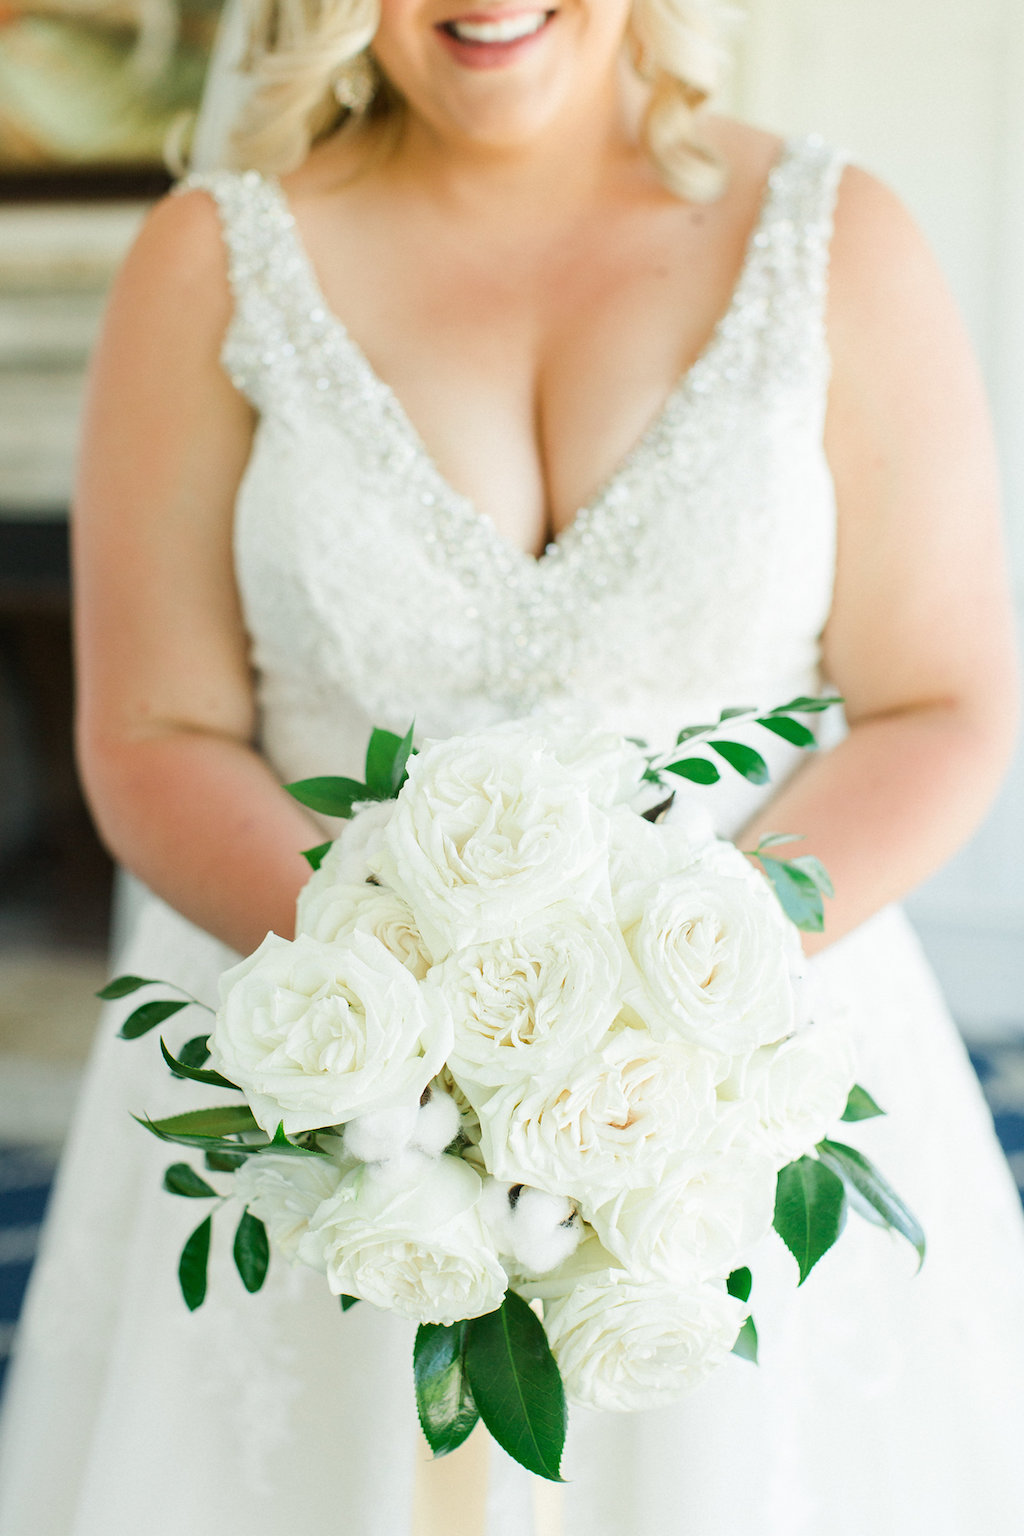 Bridal Portrait in Beaded V Neck Morilee by Madeline Gardner Wedding Dress with White Garden Rose and Greenery Bouquet | Tampa Bay Wedding Photographer Ailyn La Torre Photography